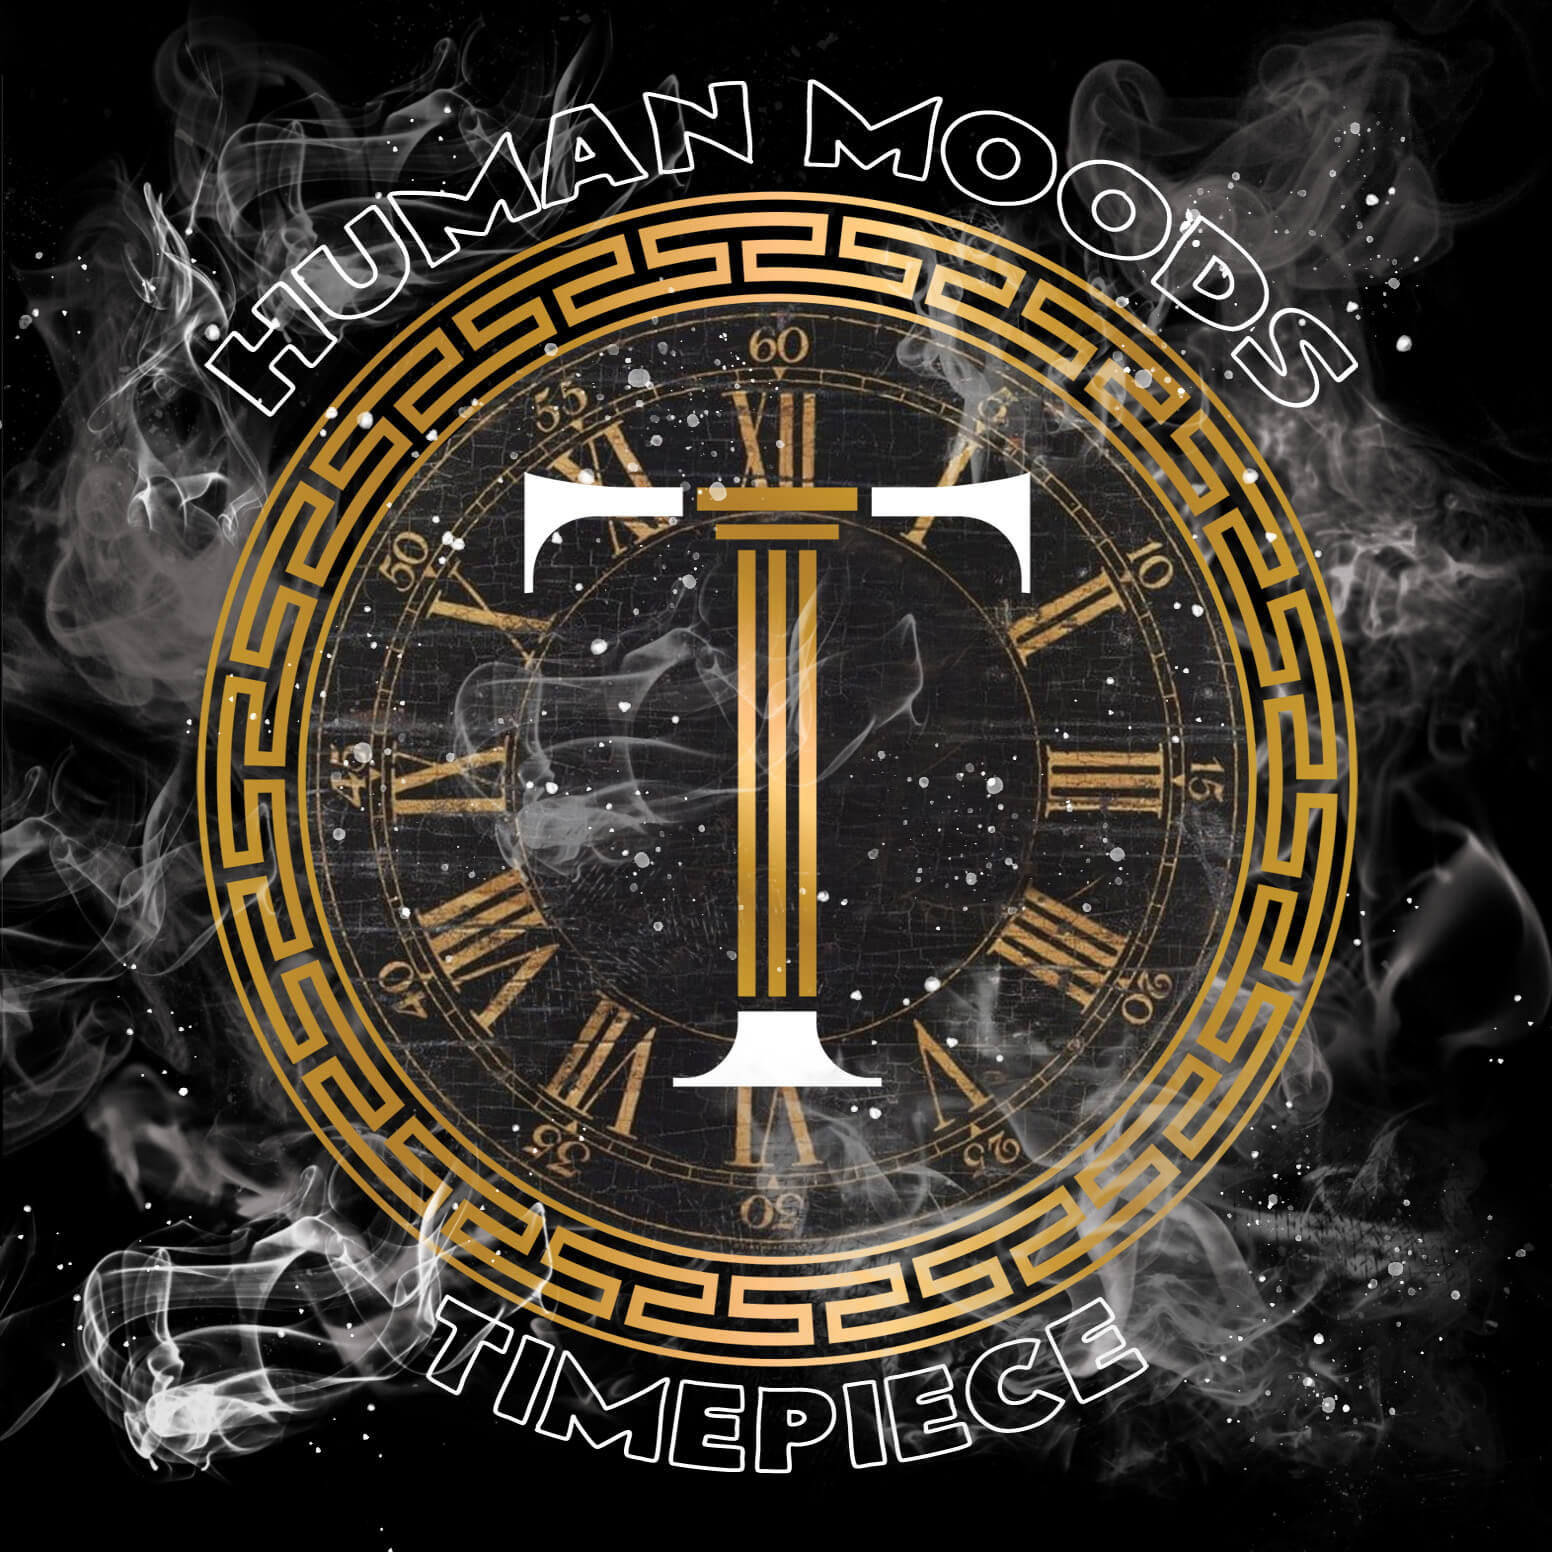 Human Moods - Timepiece cover art